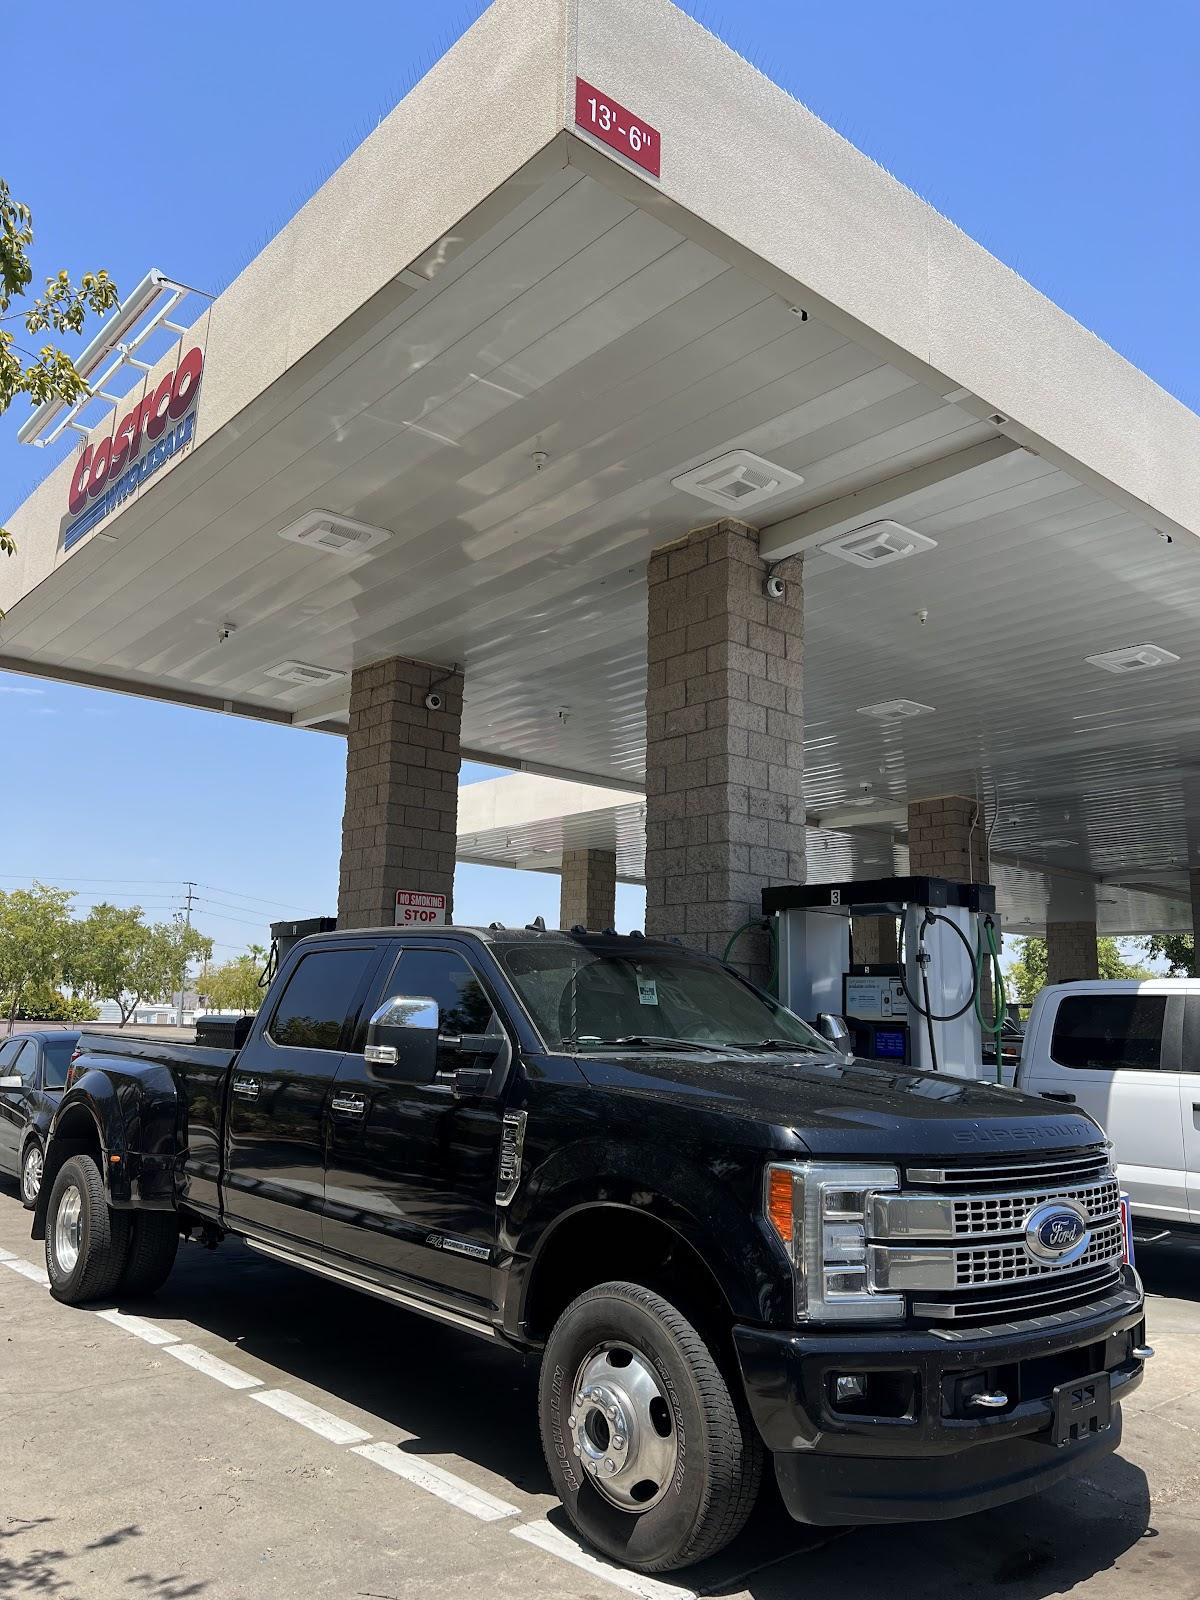 Do Costco Gas Stations Have Diesel?